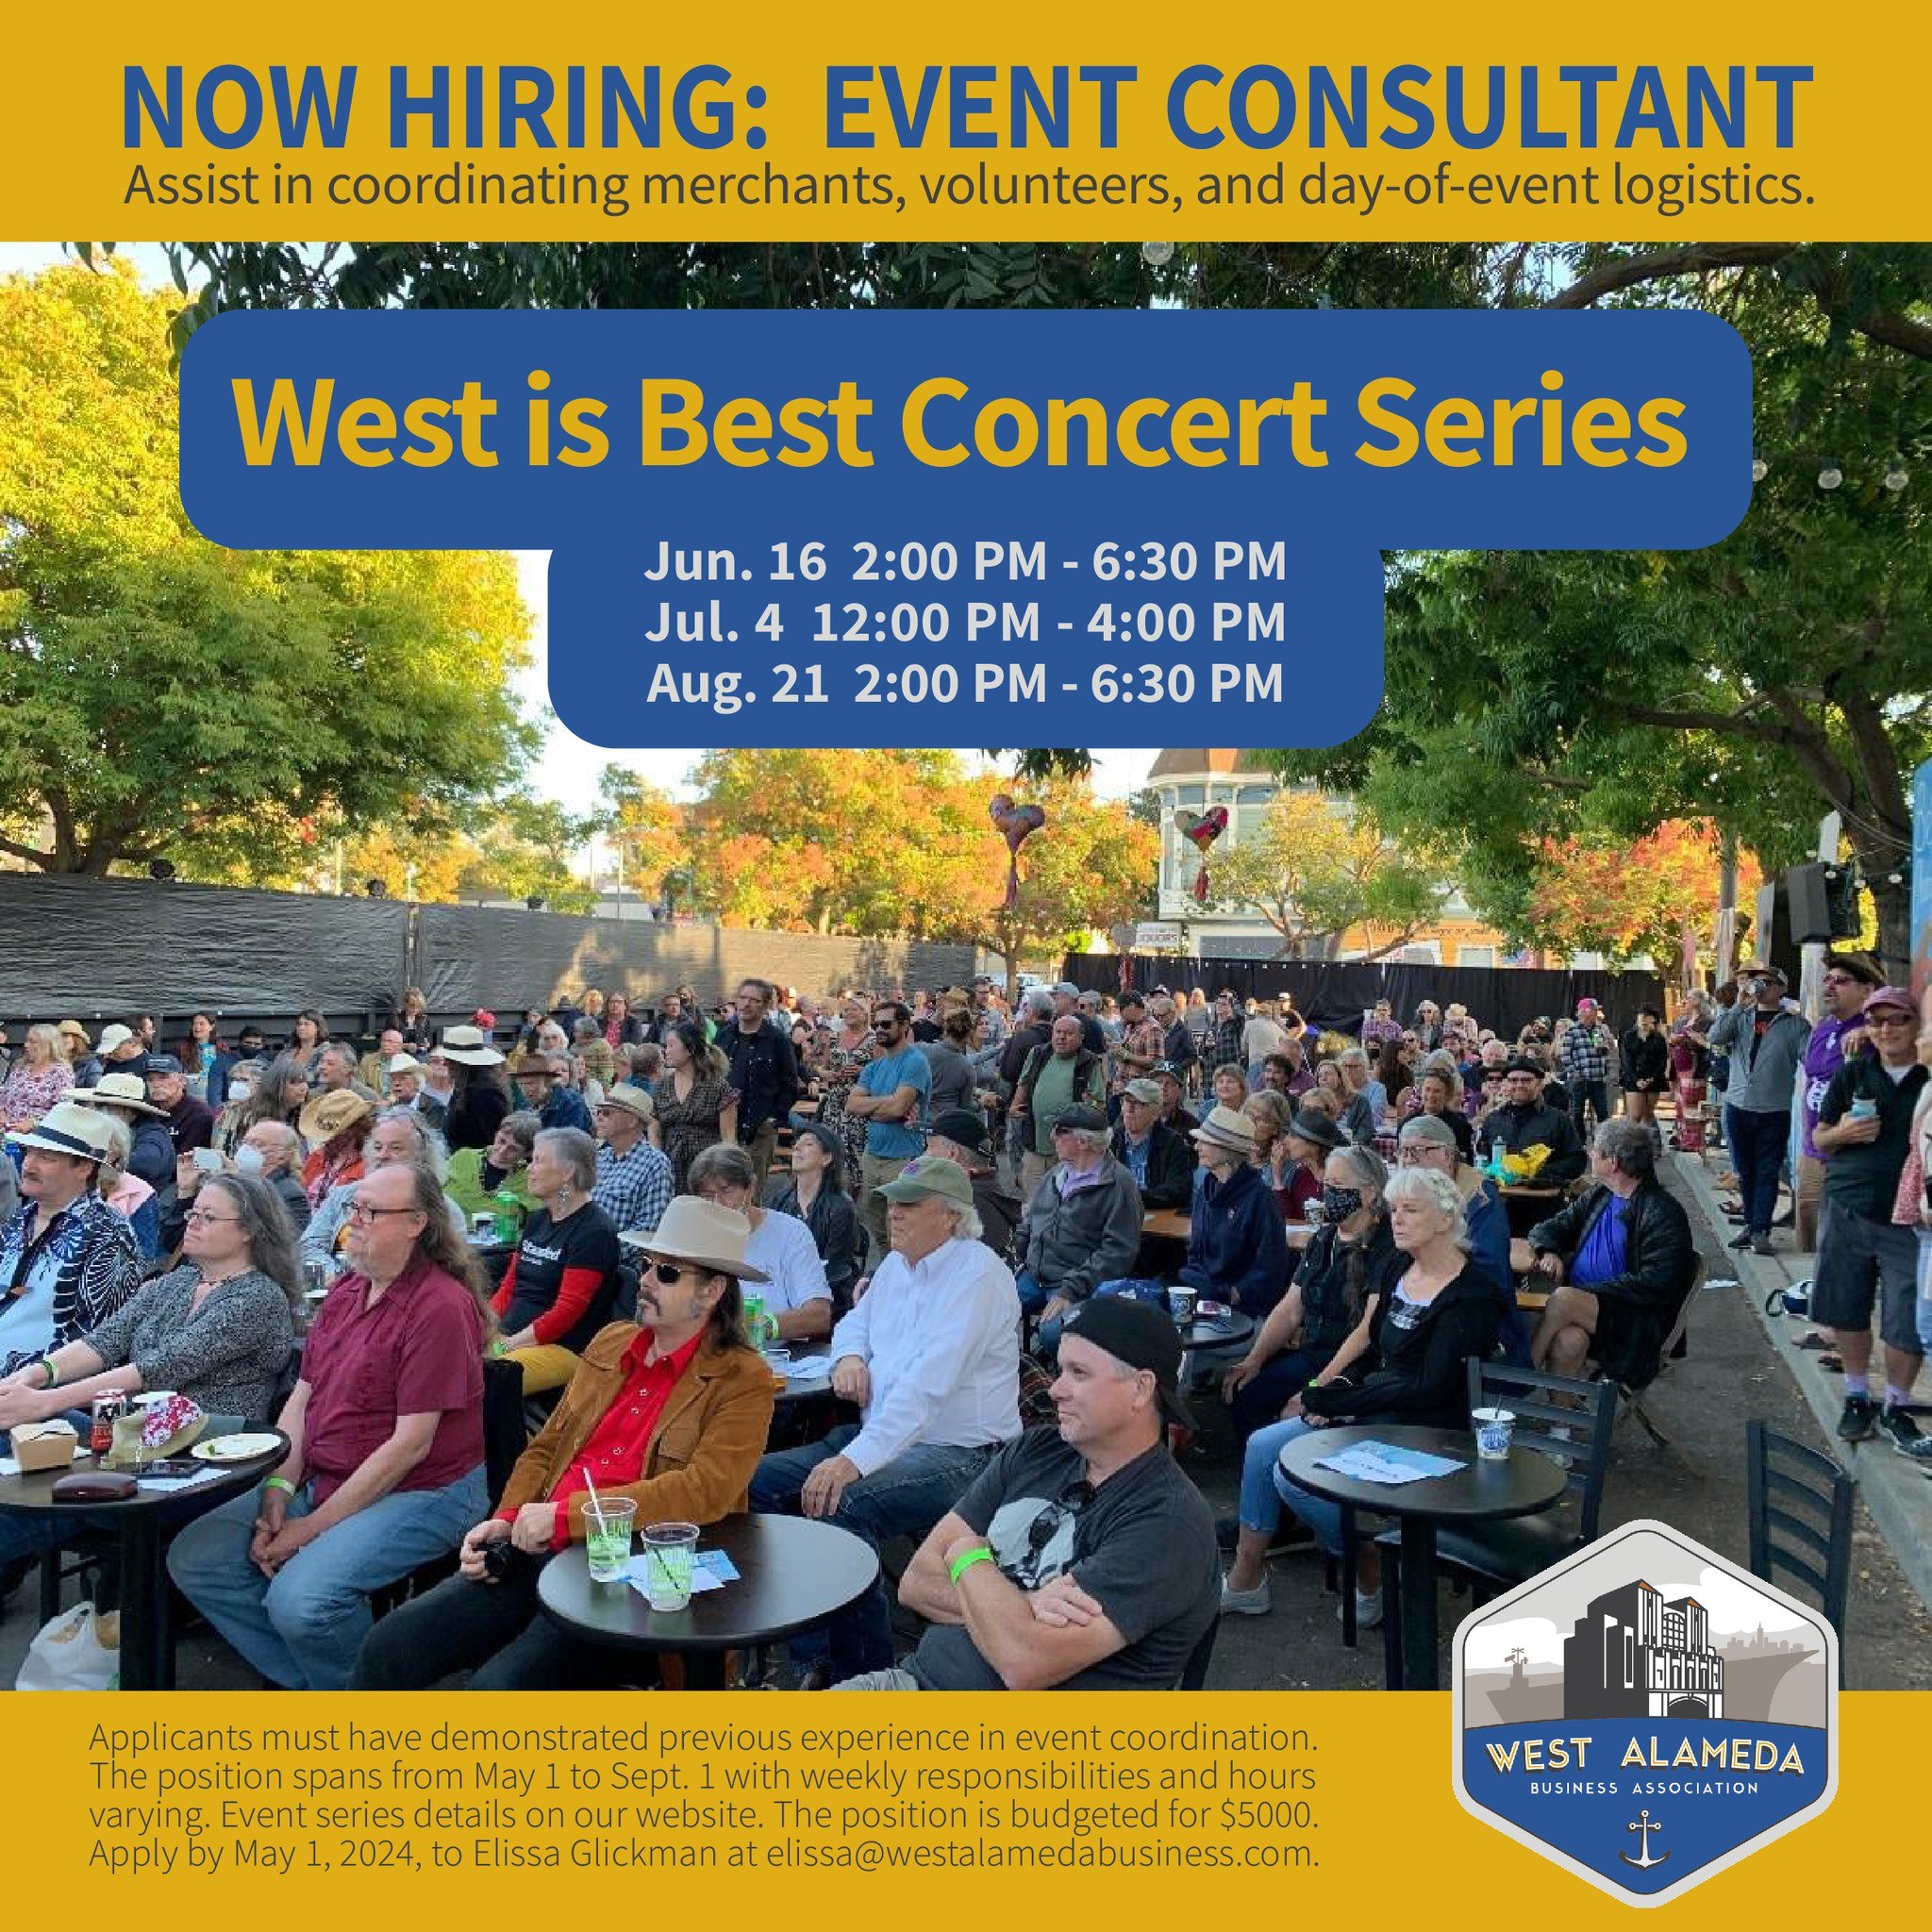 The West Alameda Business Association is seeking an Event Consultant for the West is Best Series to assist in coordinating merchants, volunteers, and day-of-event logistics.

West is Best is a vibrant celebration of community and culture in the heart